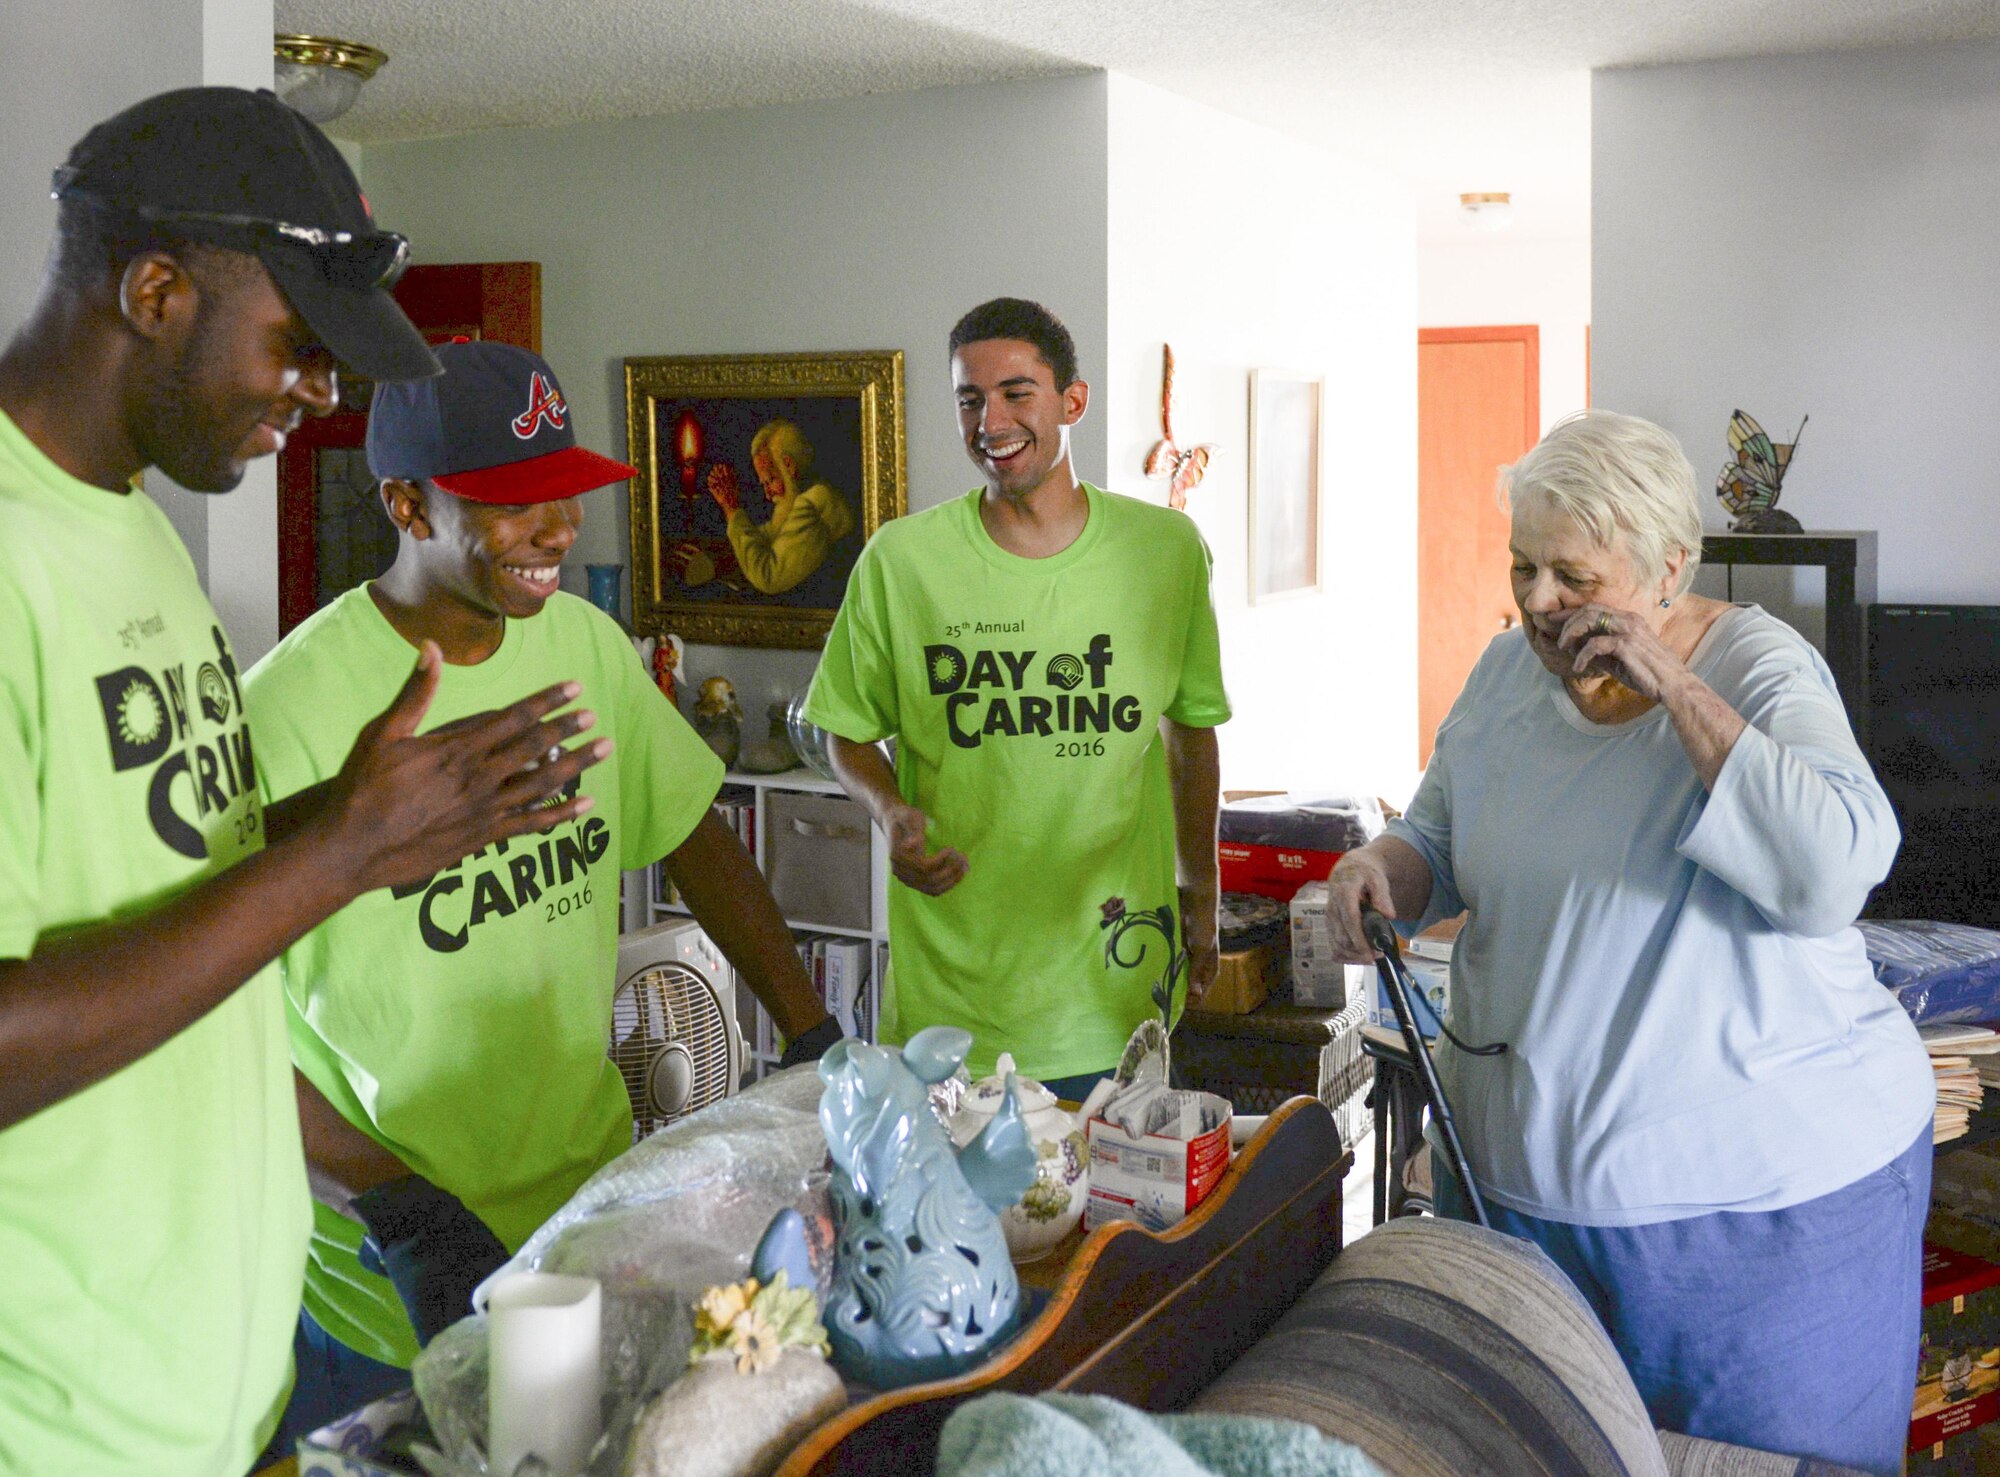 Airmen 1st Class Brandon, Michael and Shawndell, Day of Caring volunteers, who are heating, ventilation and air conditioning technicians with the 49th Civil Engineer Squadron here, laugh with Donna, a disabled resident, in Alamogordo, N.M. on Sept. 9, 2016. The Airmen helped to beautify Donna’s front lawn and backyard, and also helped her to move some furniture. (Last names are being withheld due to operational requirements. U.S. Air Force photo by Airman Alexis P. Docherty)